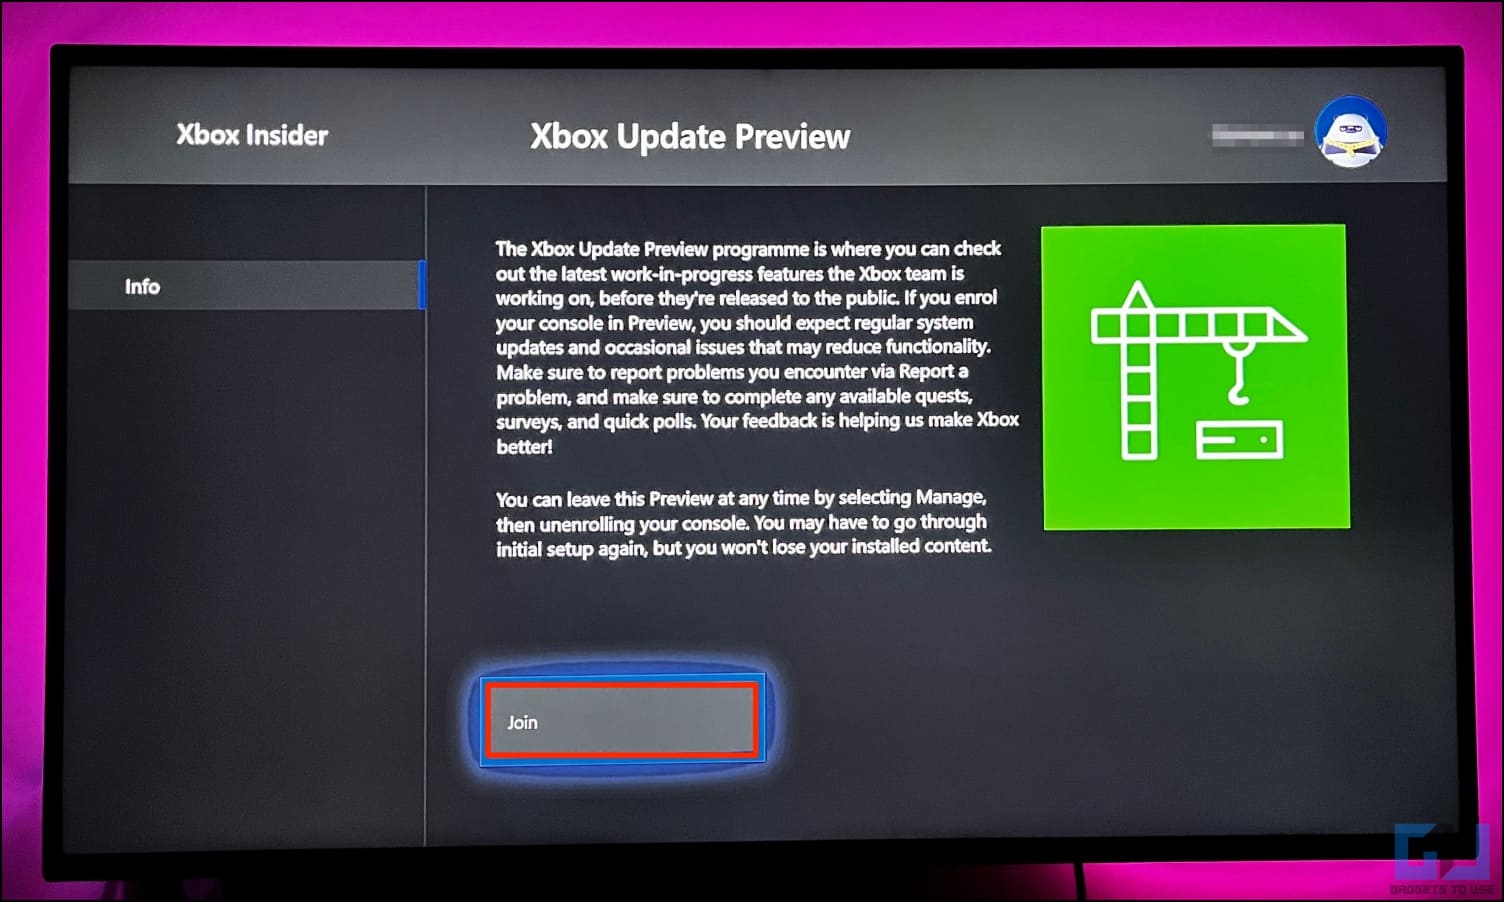 Enrol into Xbox Update Preview